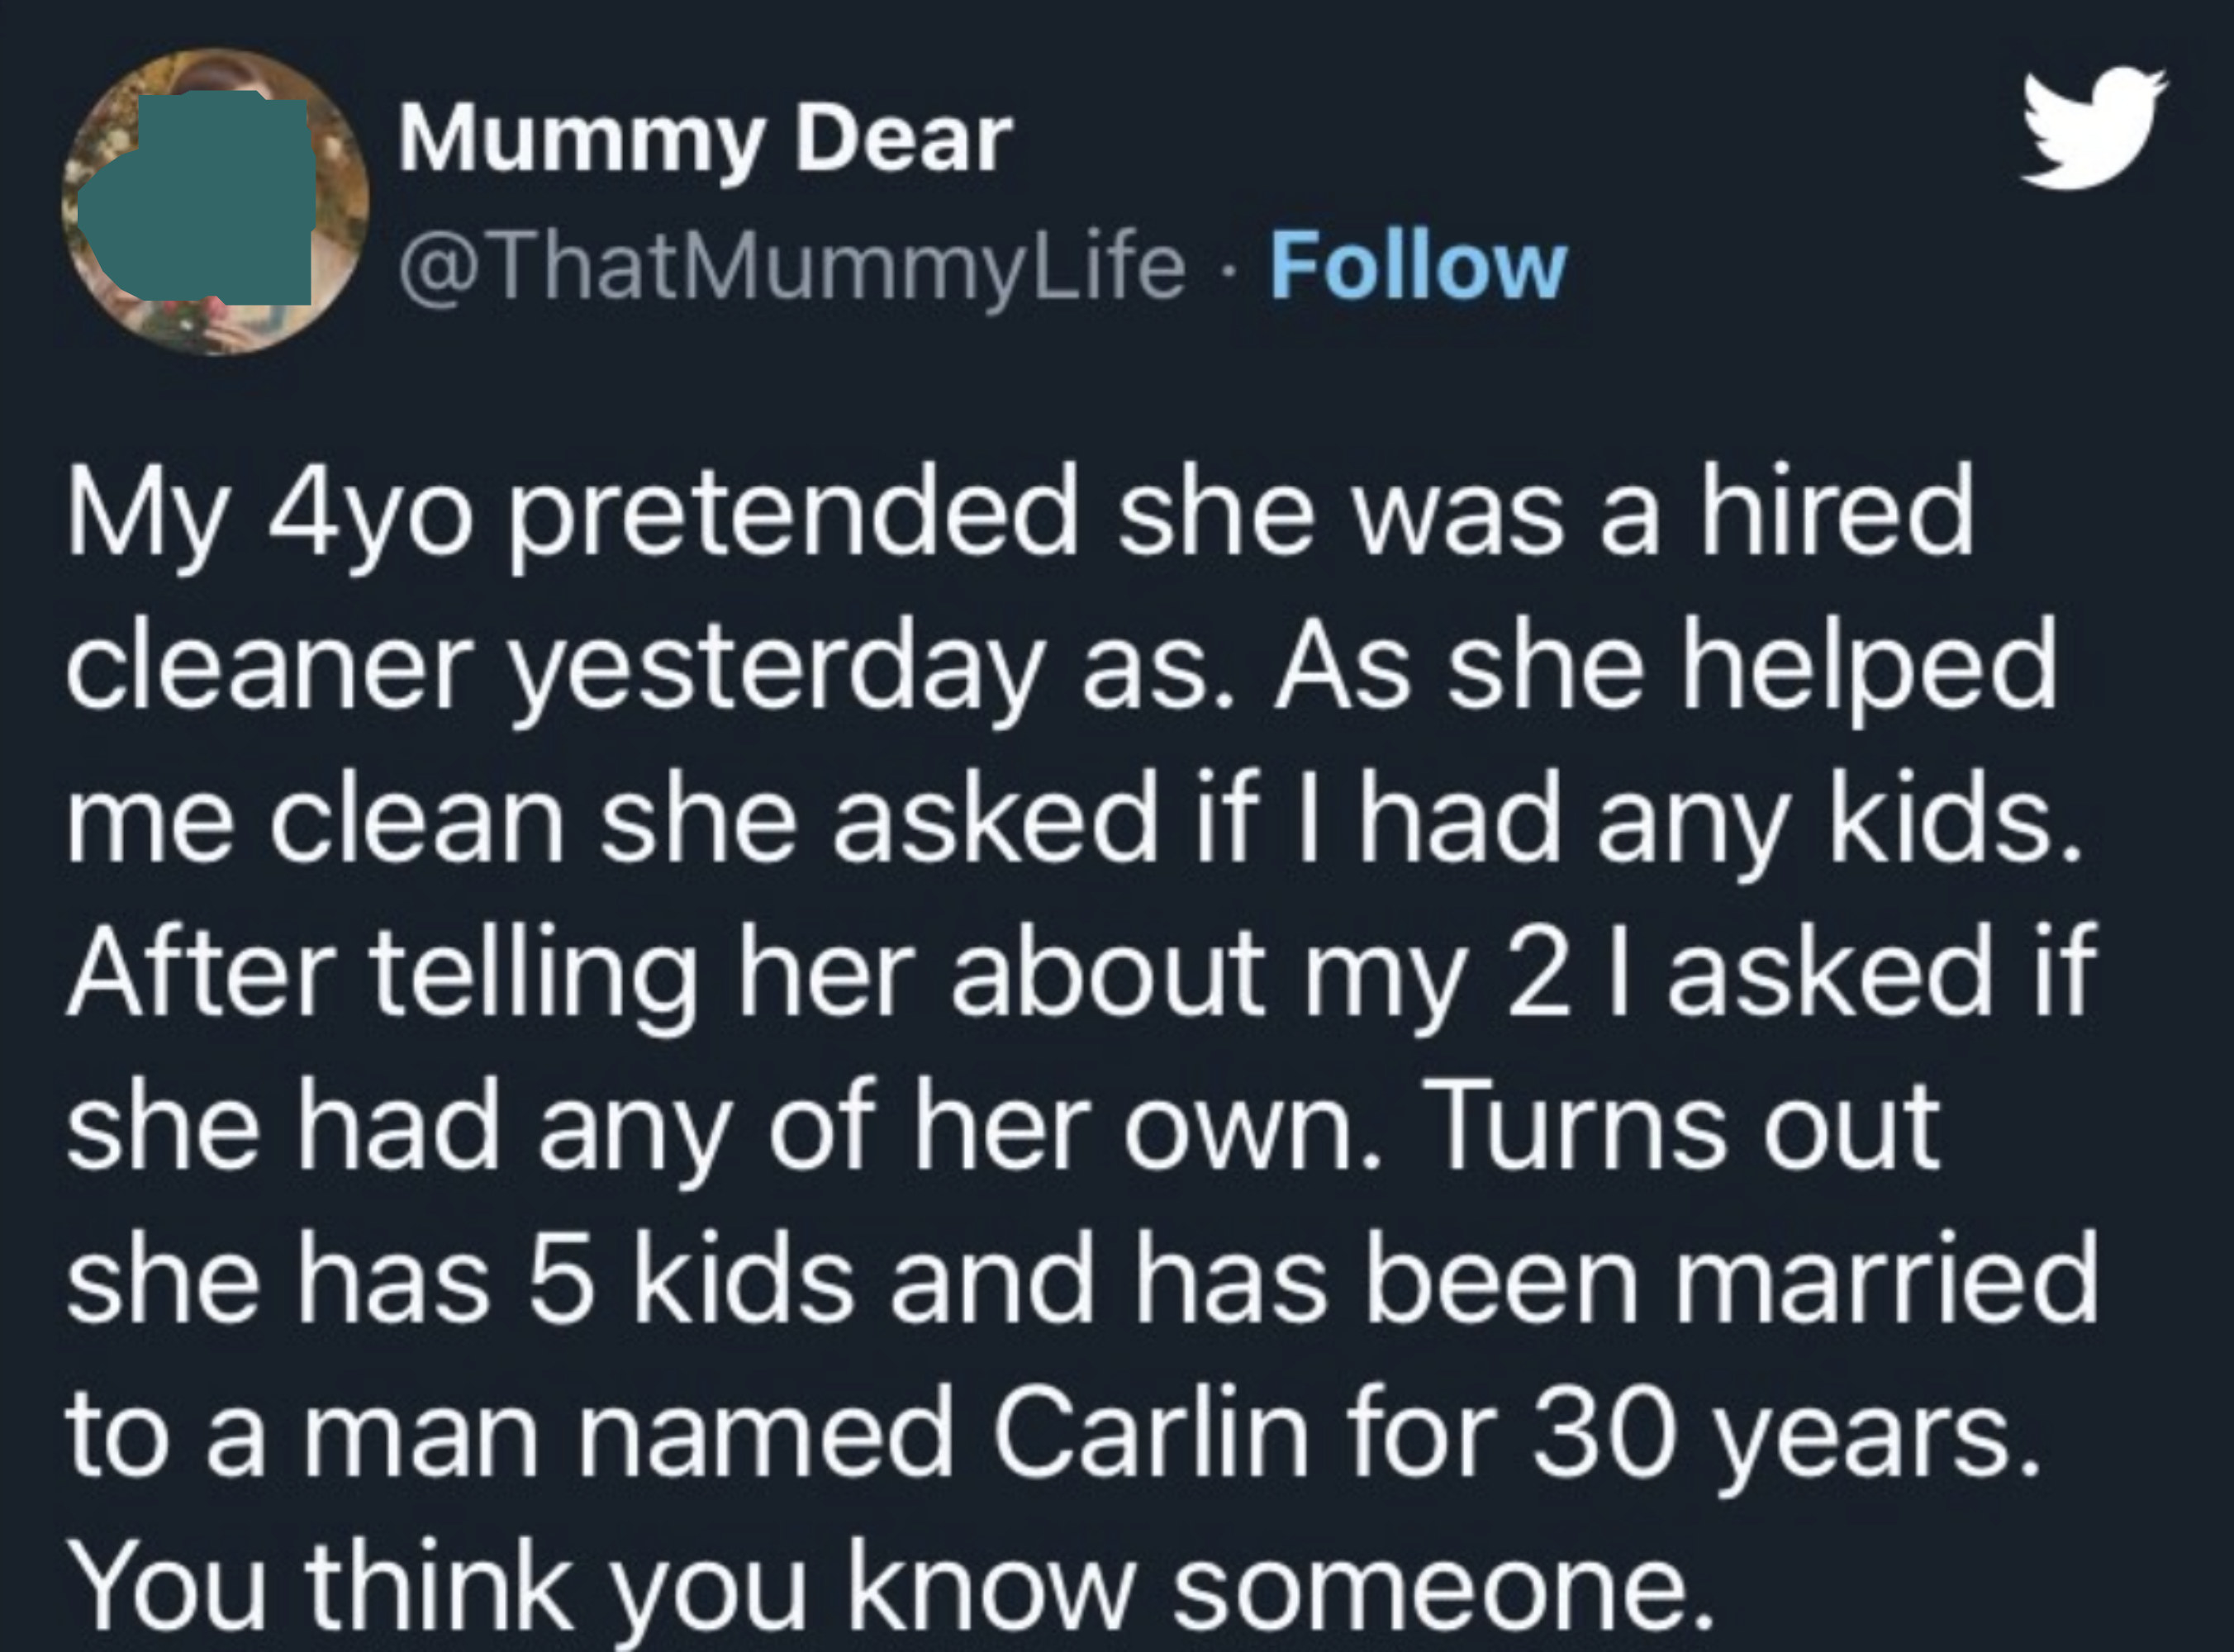 4-year-old was helping her mom clean and pretended she was a hired cleaner, and when the mom asked her if she had any kids, she said she has 5 kids and has been married to a man named Carlin for 30 years; mom says &quot;You think you know someone&quot;